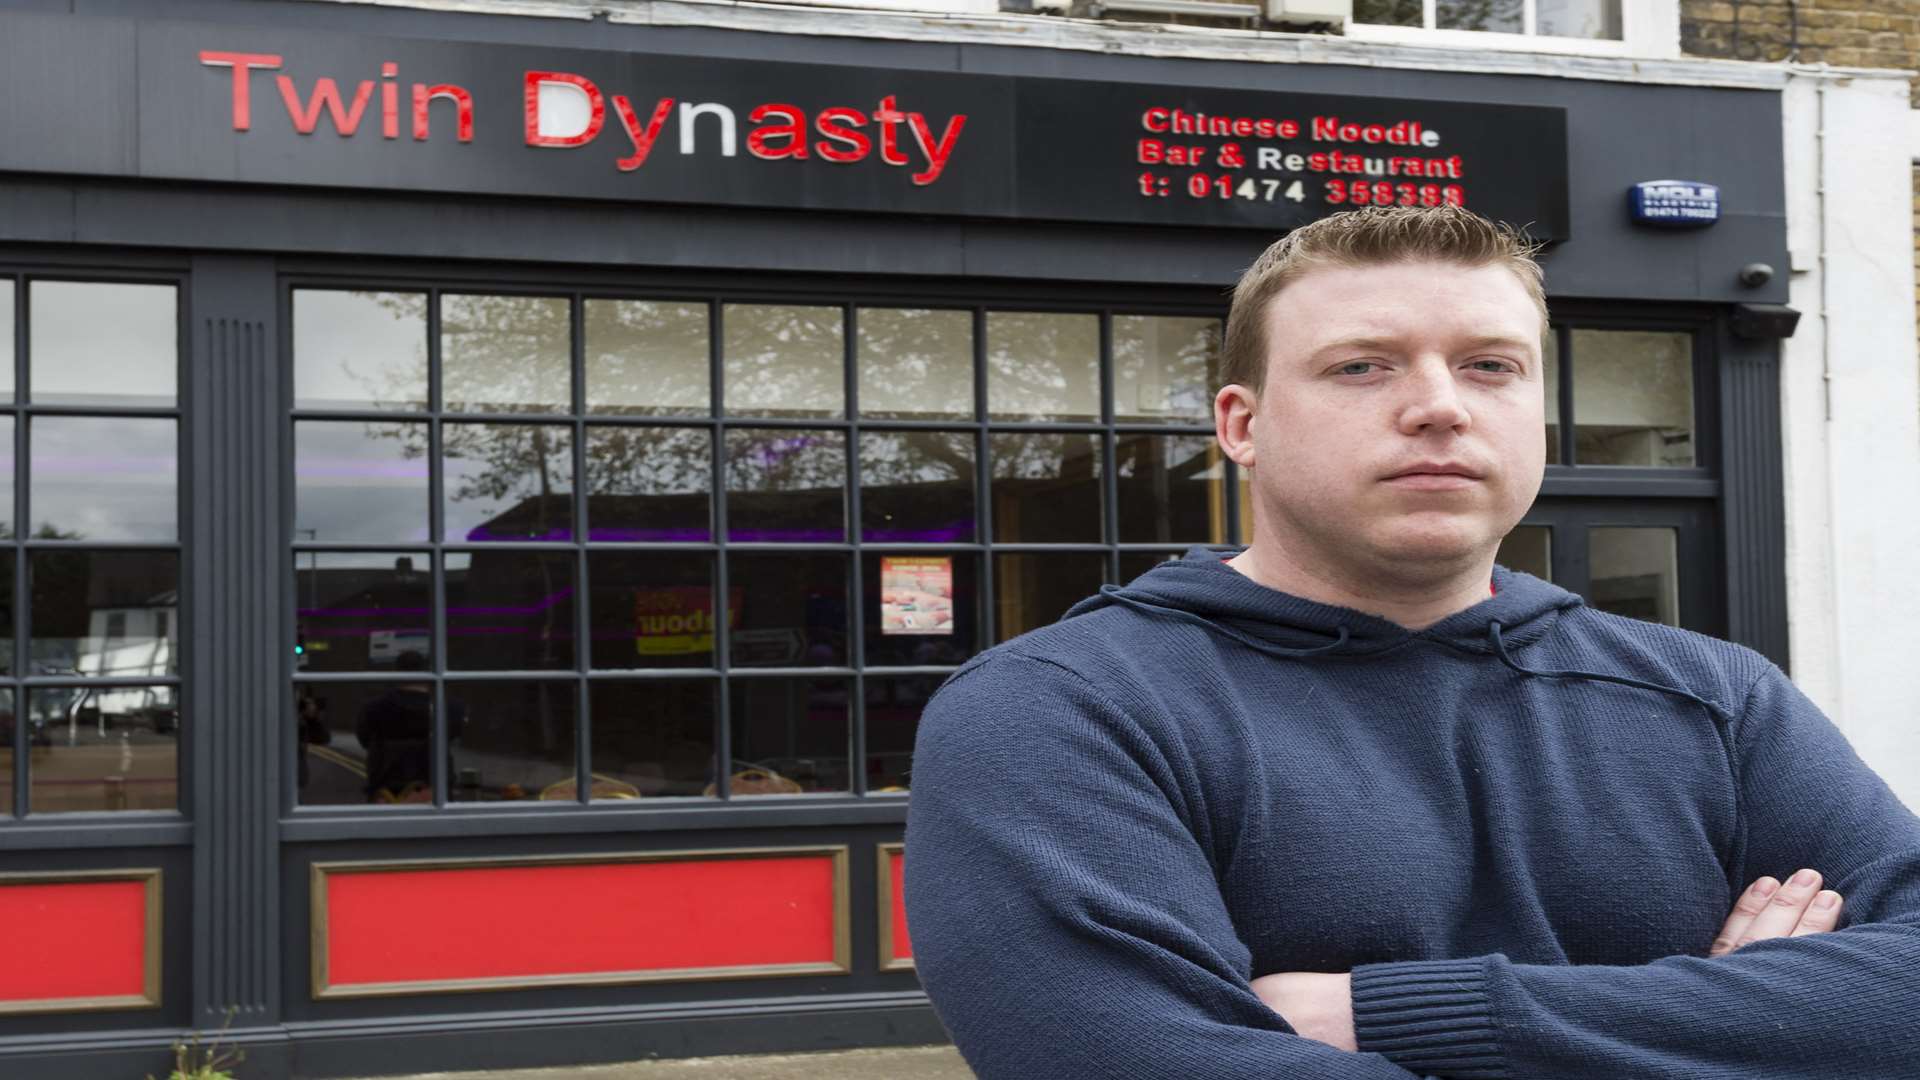 Richard Moore outside the Twin Dynasty Chinese restaurant in Windmill Street, Gravesend